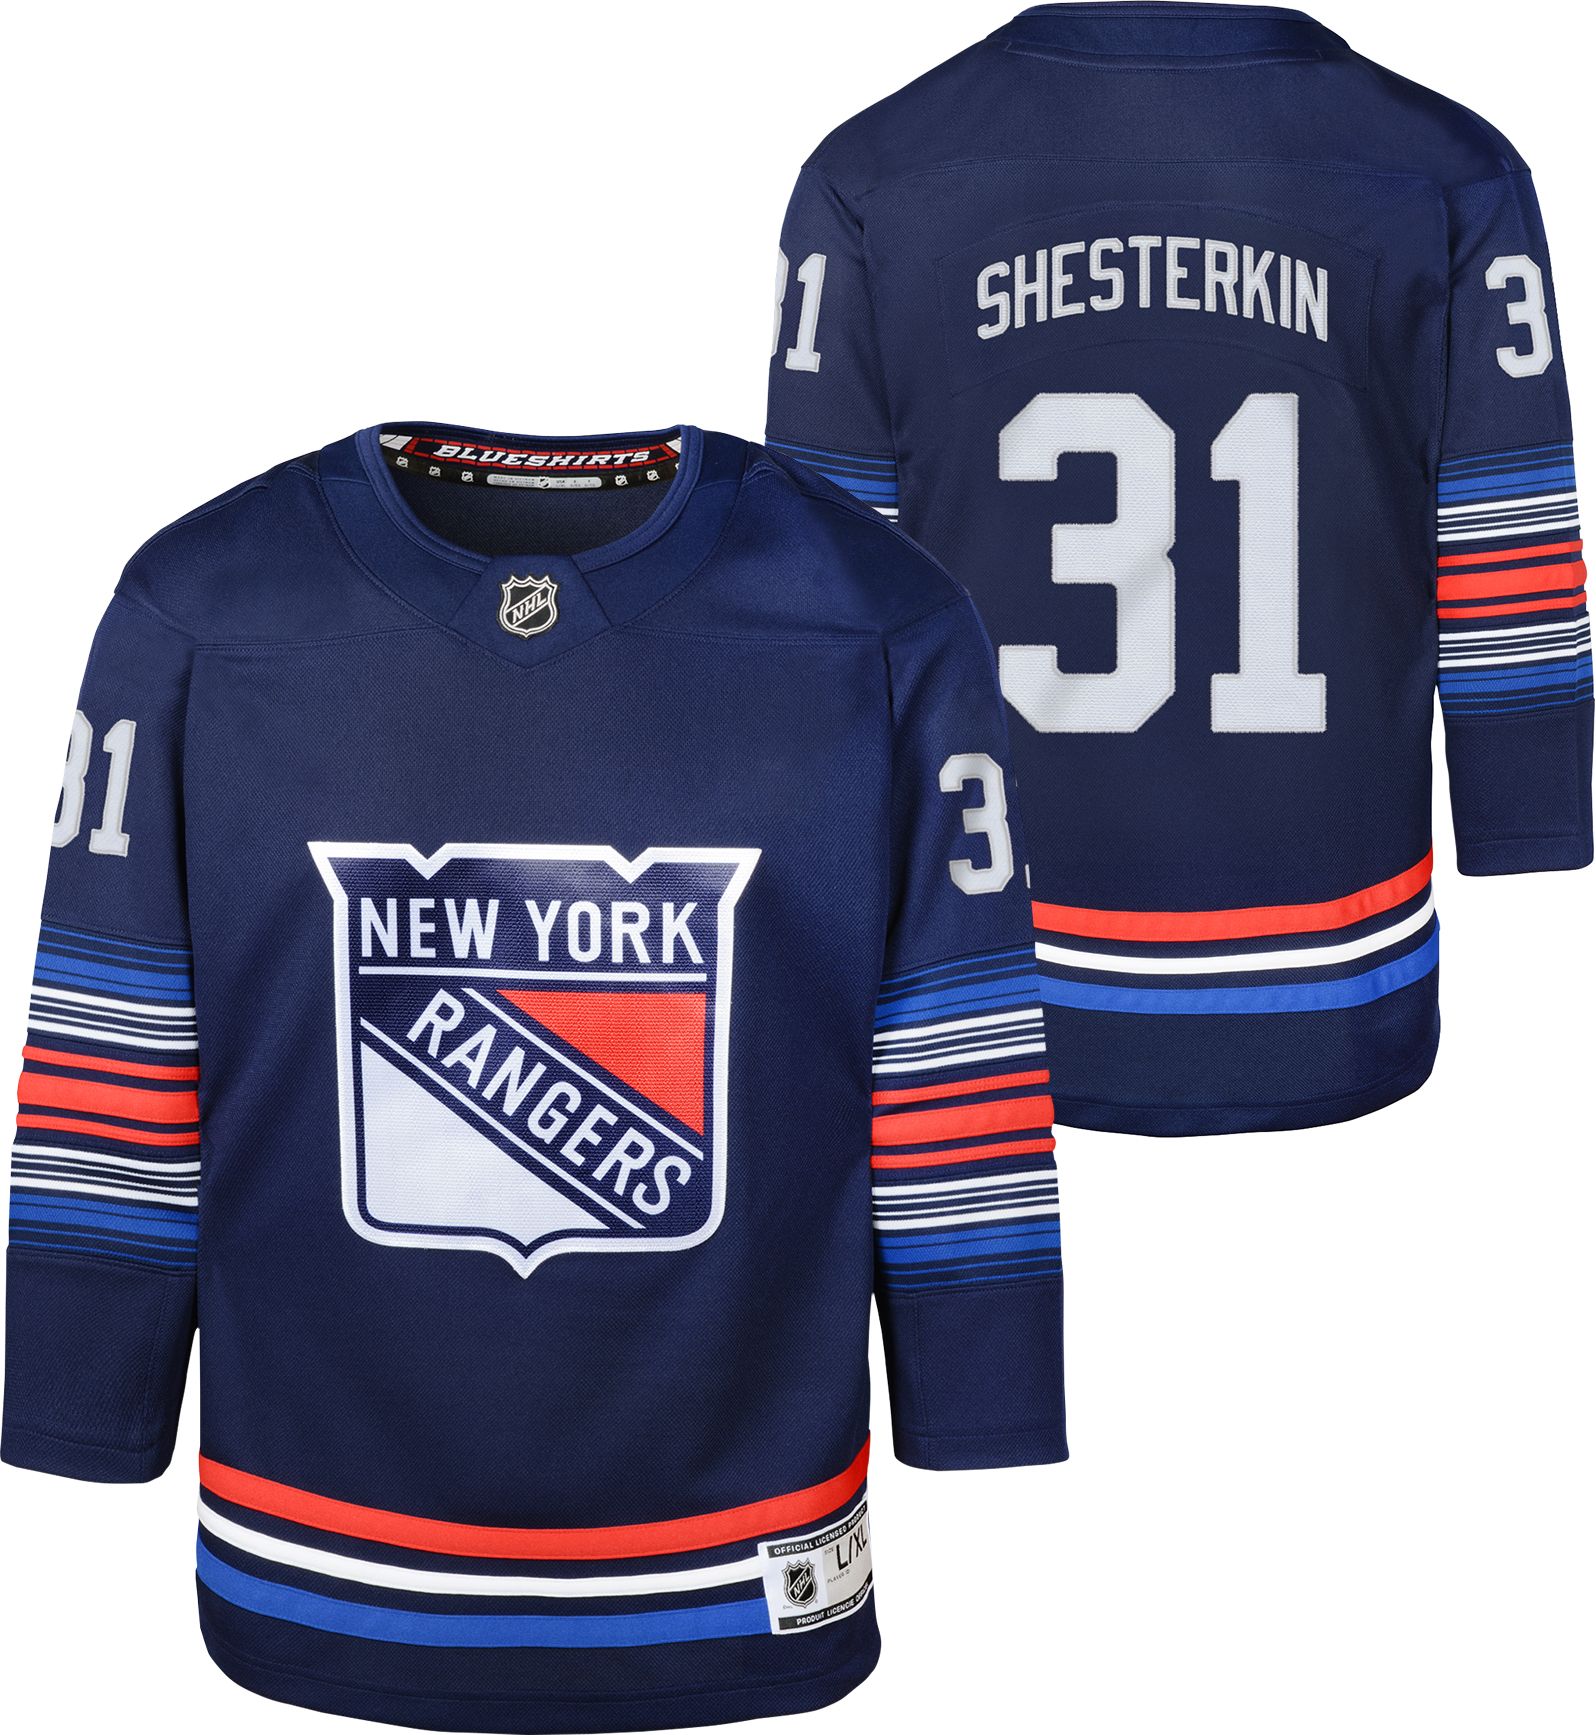 youth shesterkin jersey